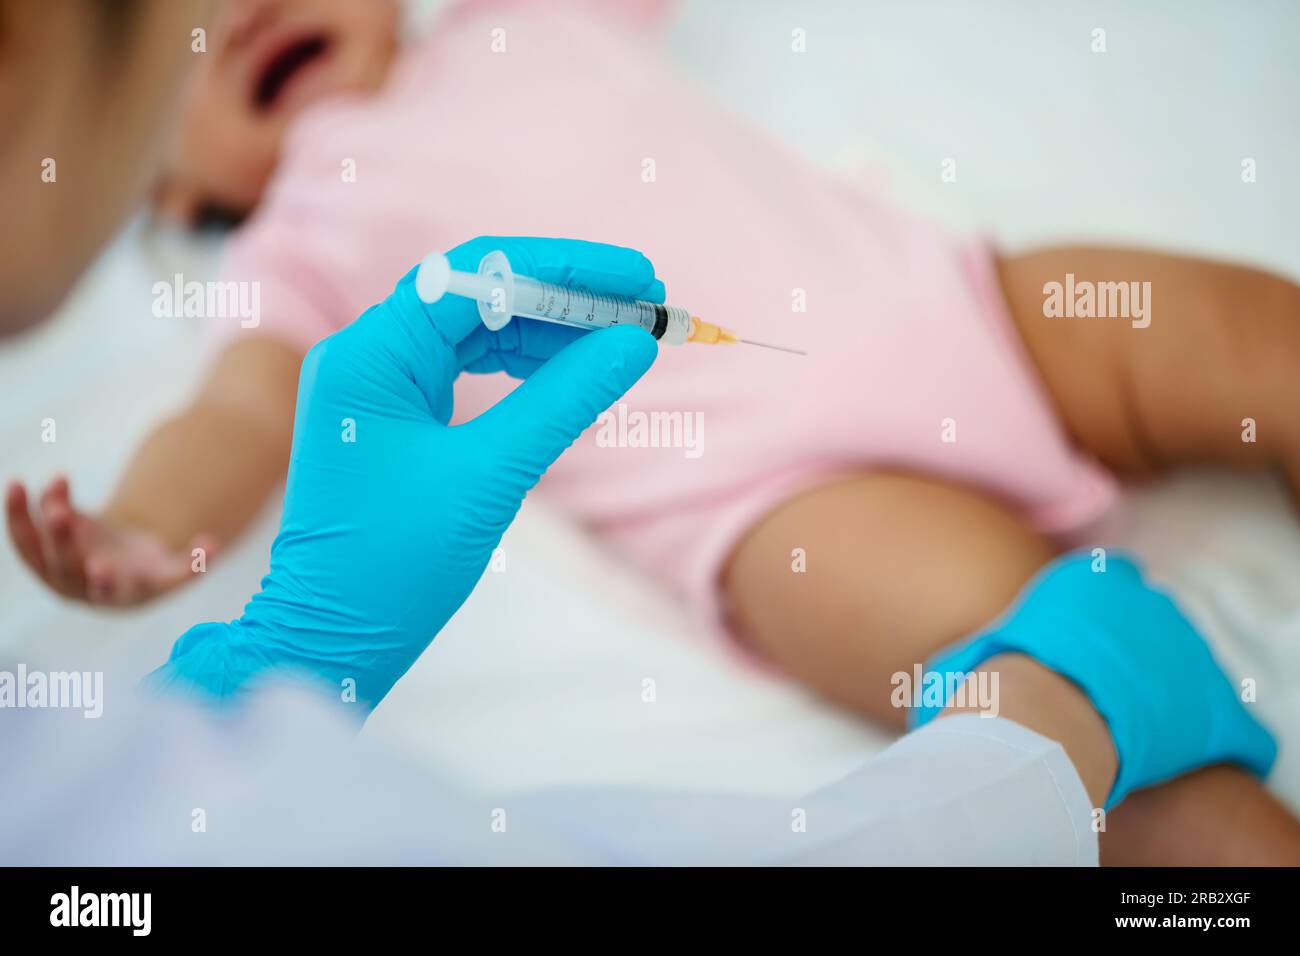 doctor holding syringe and preparing vaccine giving injection to leg of crying infant baby Stock Photo